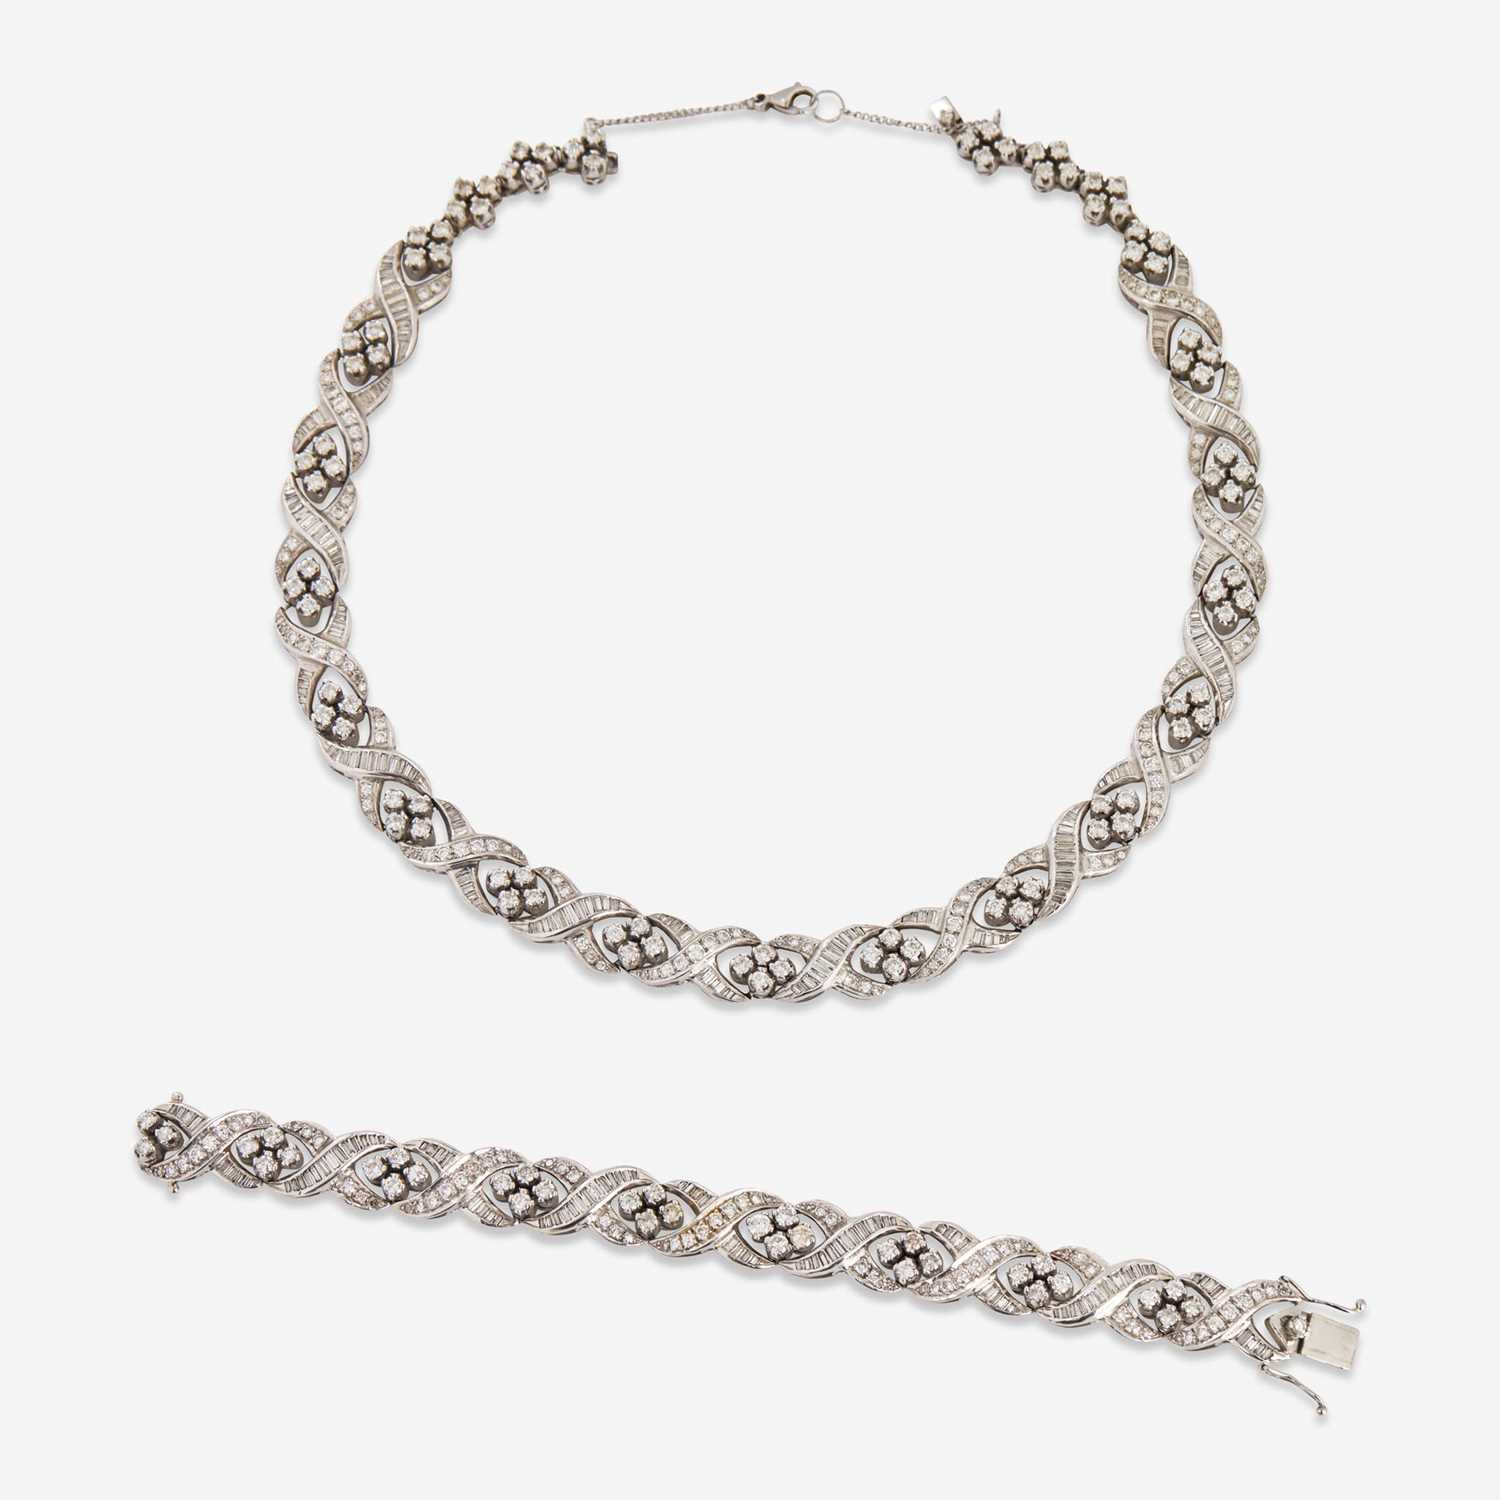 Lot 5 - A Matching Set of 14K White Gold and Diamond Necklace and Bracelet